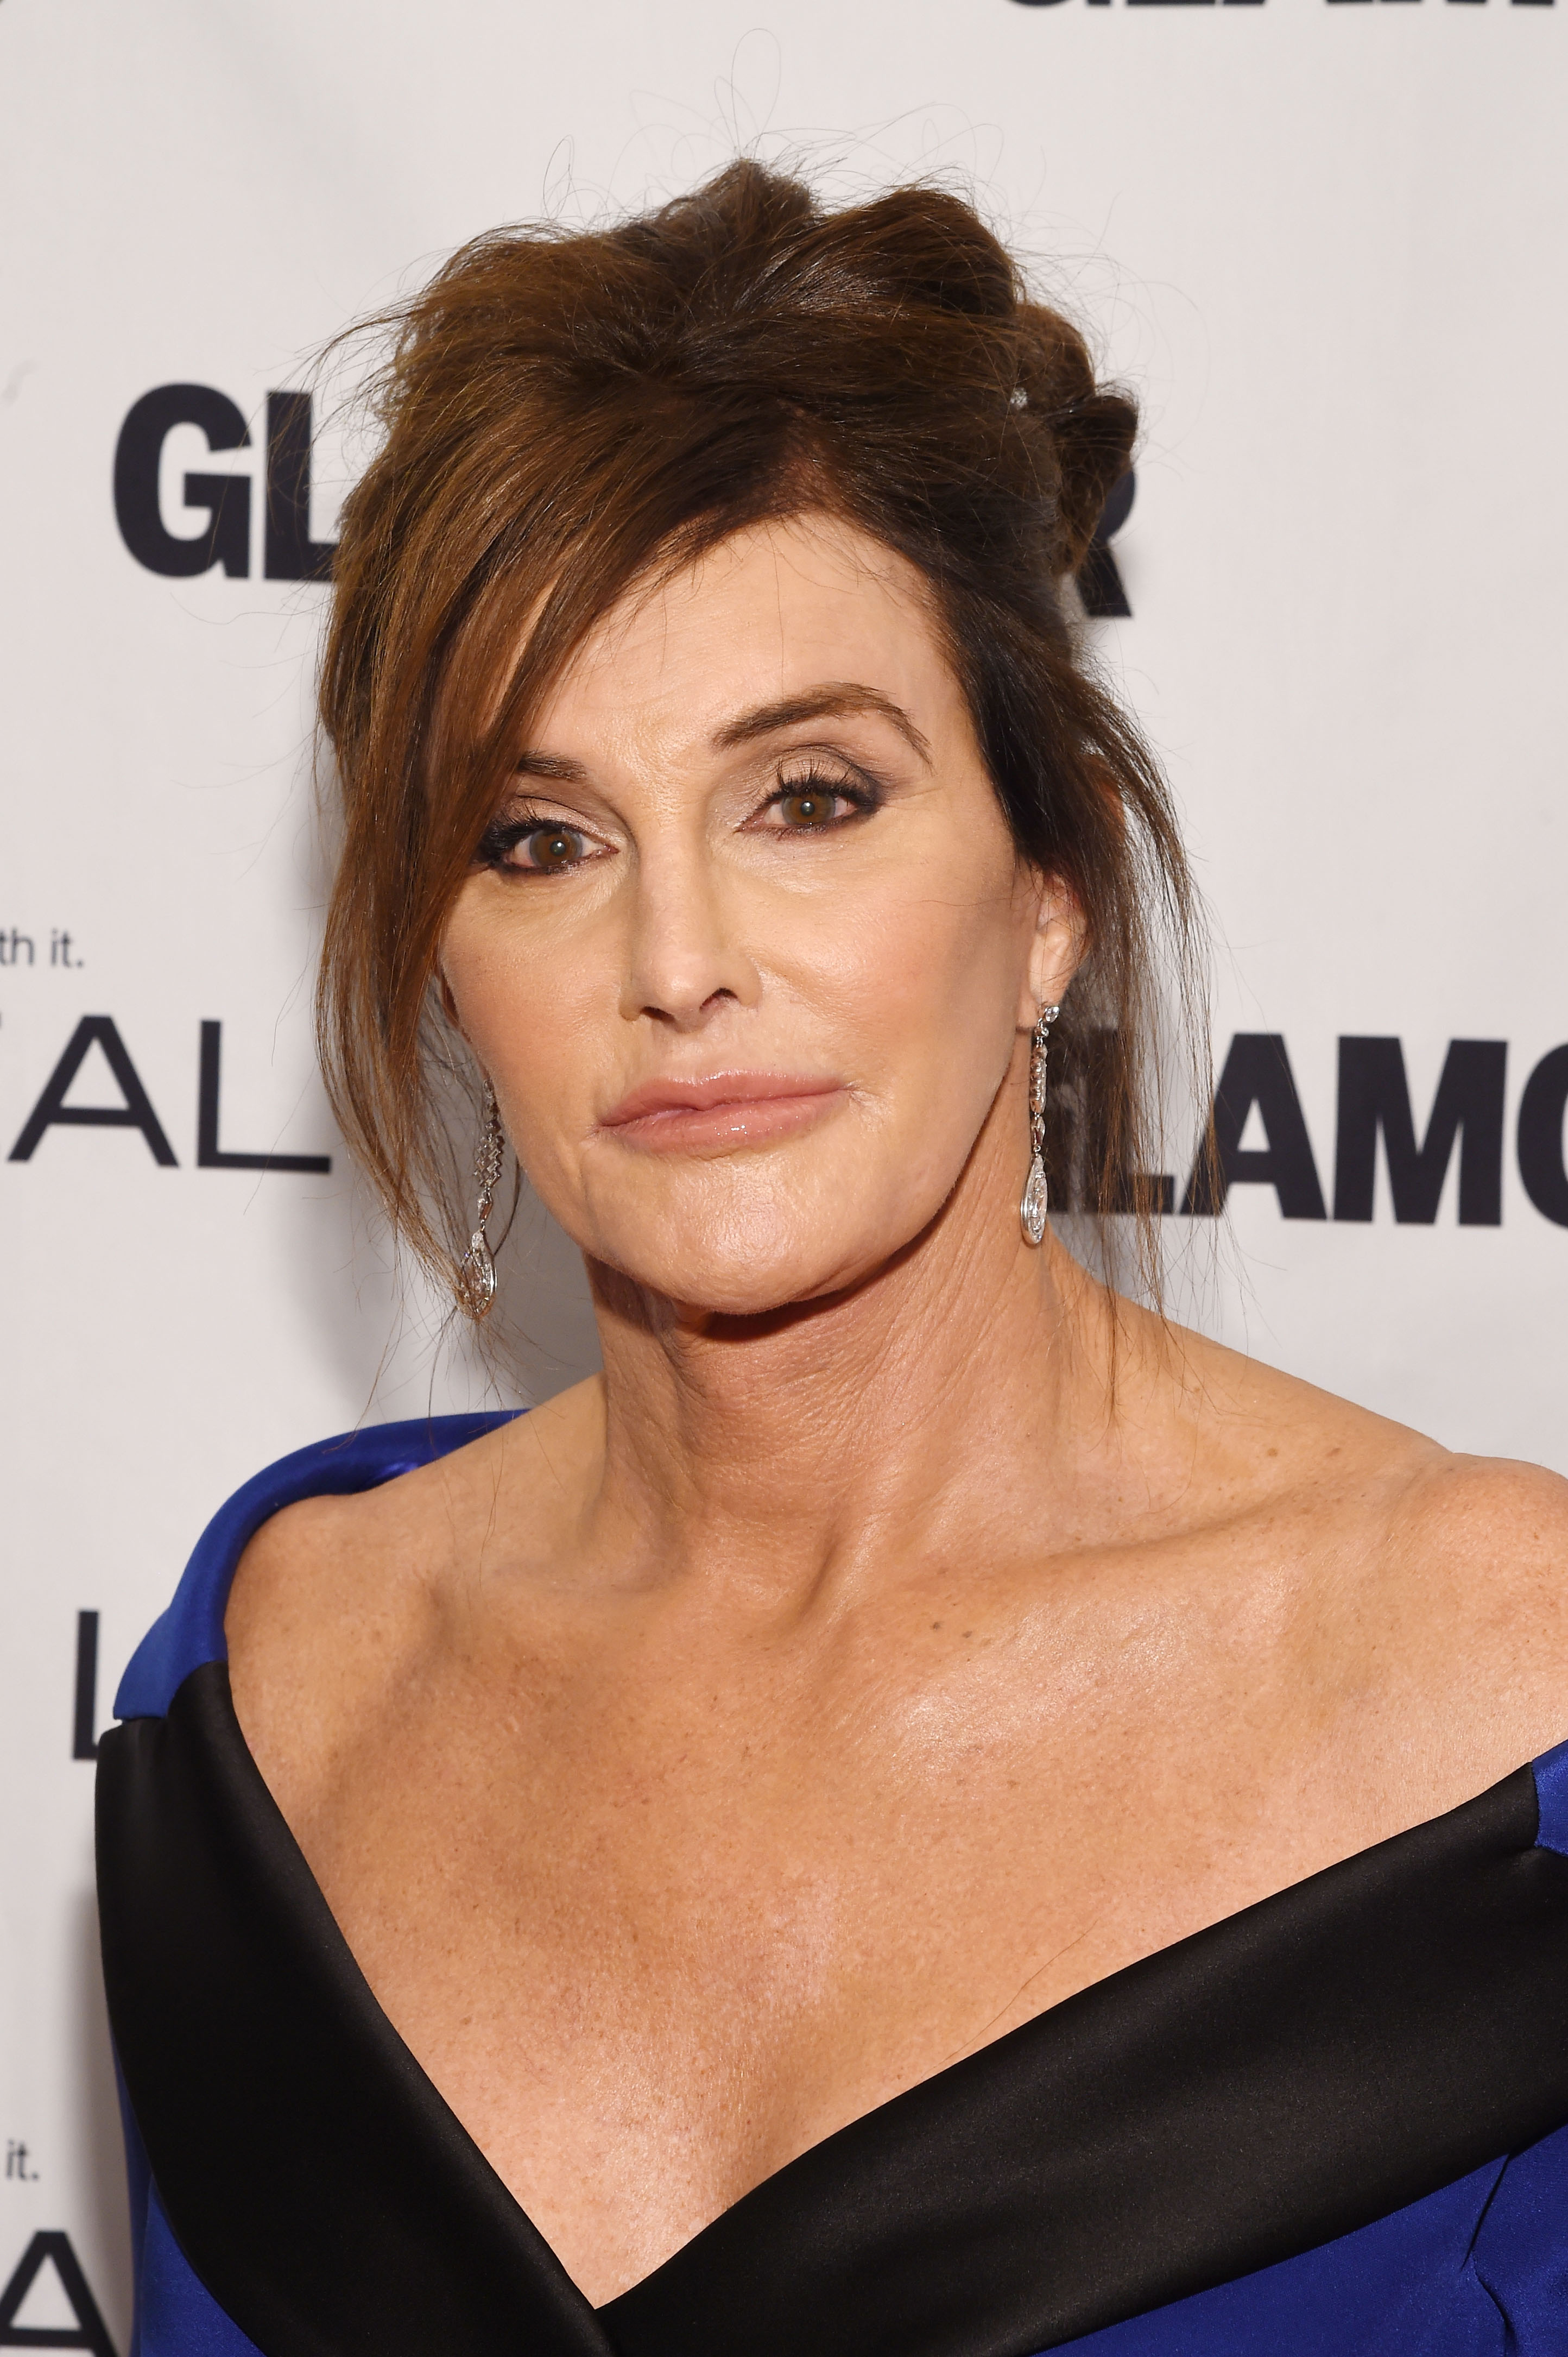 alex brett recommends caitlyn jenner nudes pic